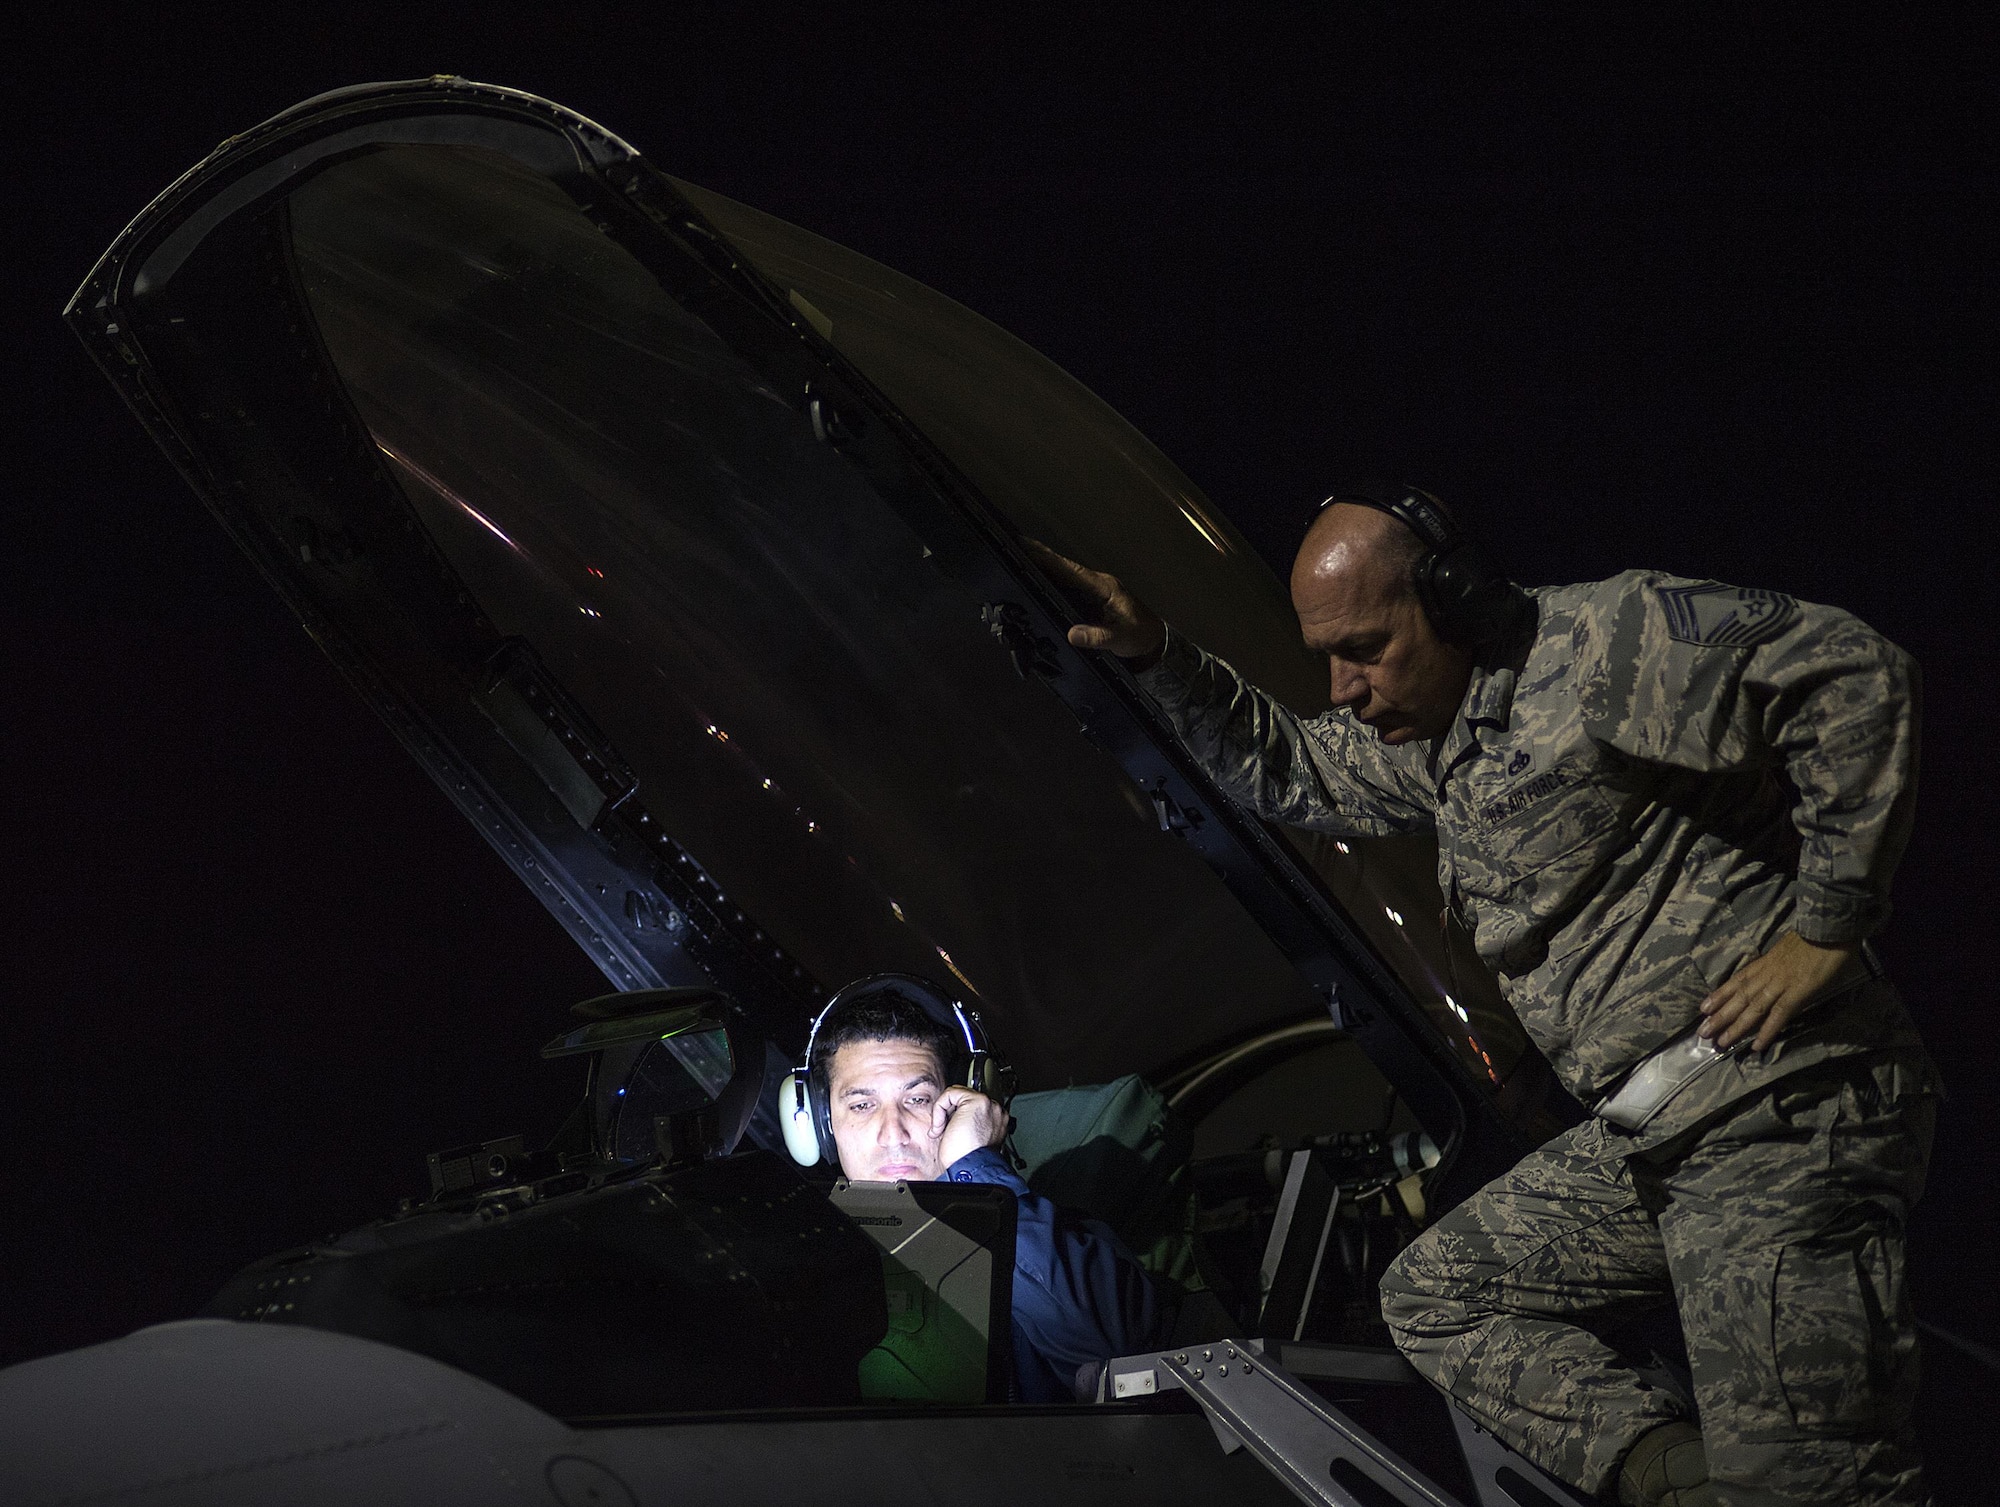 From left, Staff Sgt. Erick Vega, an avionics specialist with the 555th Fighter Squadron out of Aviano Air Base, Italy, attempts to figure out why the space systems on his F-16 Fighting Falcon aren't working correctly, while Chief Master Sgt. Tony Russell, a Red Flag Inspector General evaluator, observers. Airmen from the 527th Space Aggressor Squadron attempt to challenge Red Flag participants by posing attacks on space assets, simulating a potential attack by the enemy. "We challenge space forces to get better. And they do," said Capt. Brian Goodman, 527th SAG.  (U.S. Air Force photo/Tech. Sgt. David Salanitri)